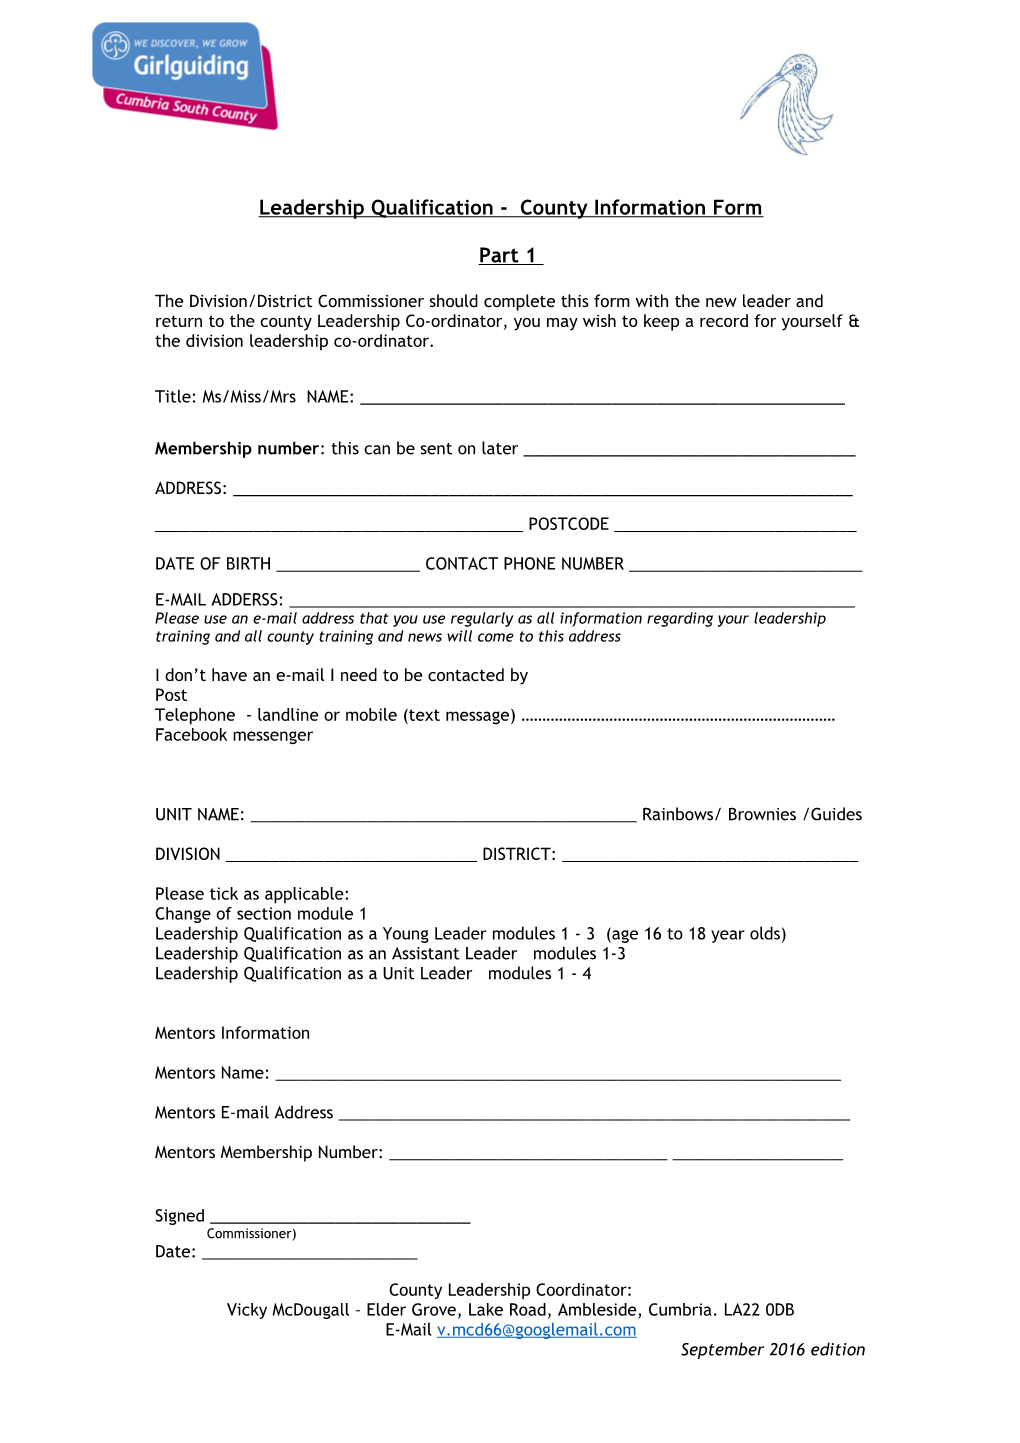 Leadership Qualification - County Information Form